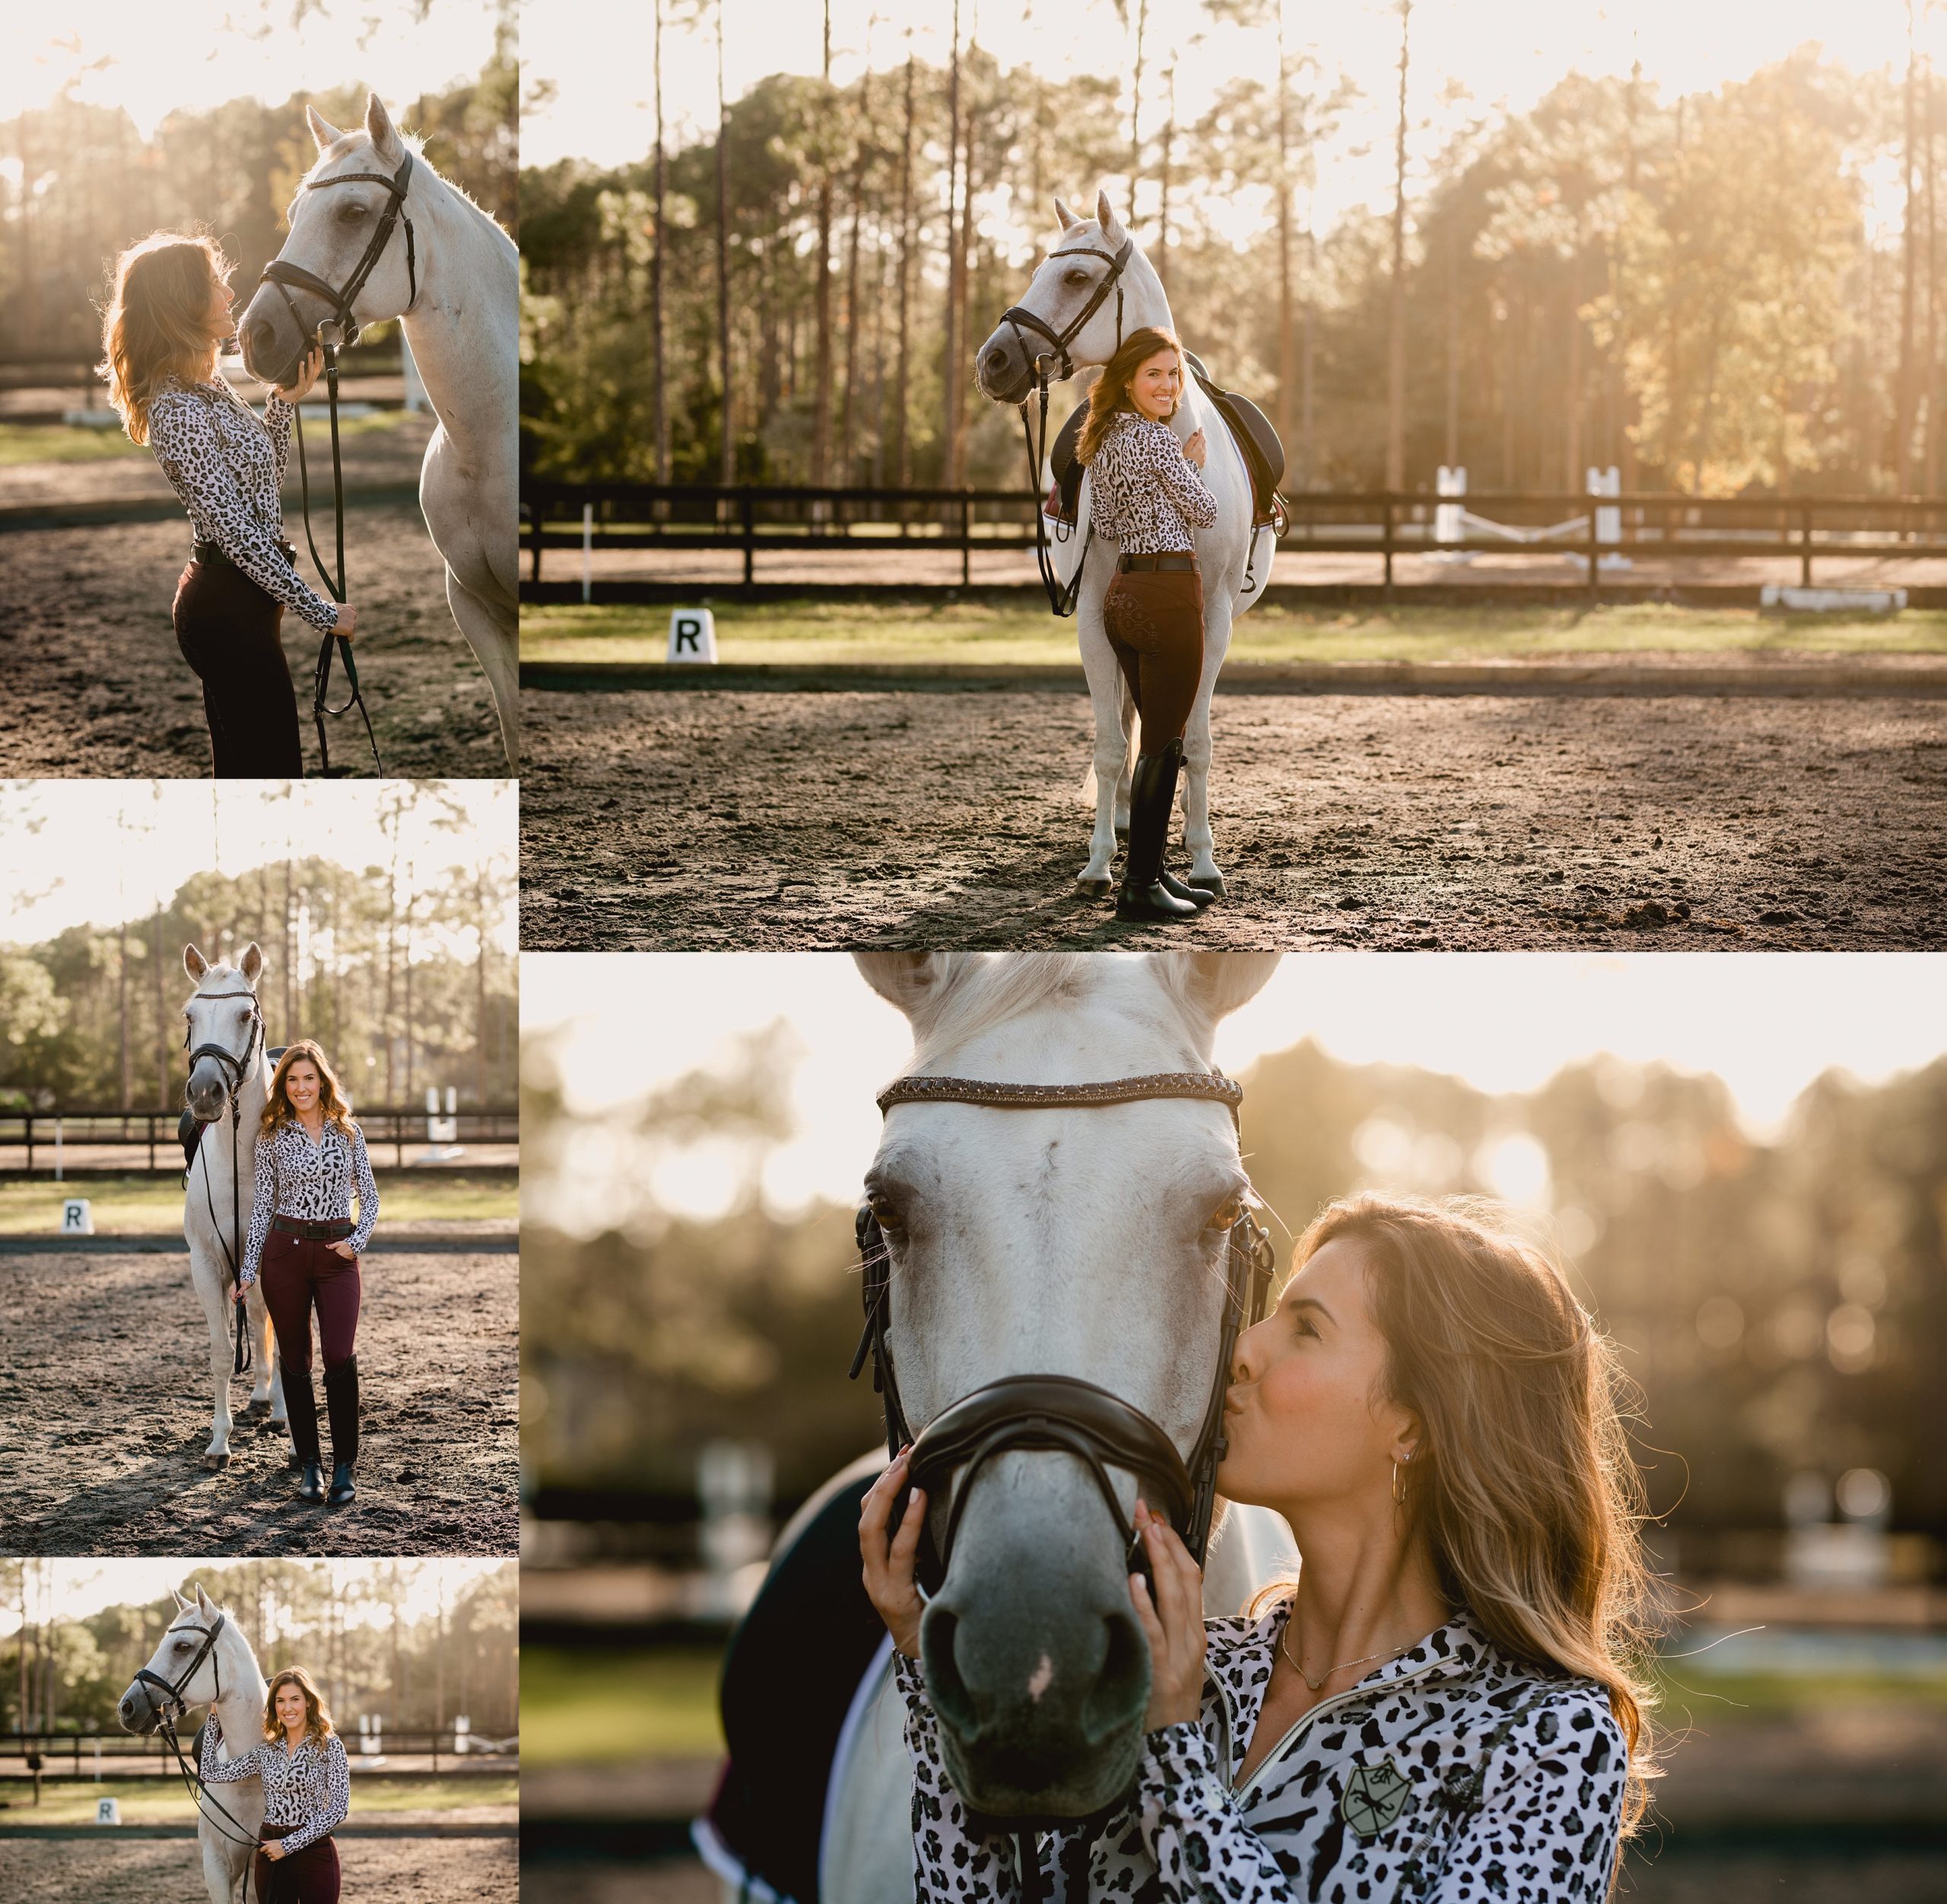 Grey Quarter Horse mare who does dressage in North Florida. - Golden Hour - Horse and Rider poses - Romf breeches